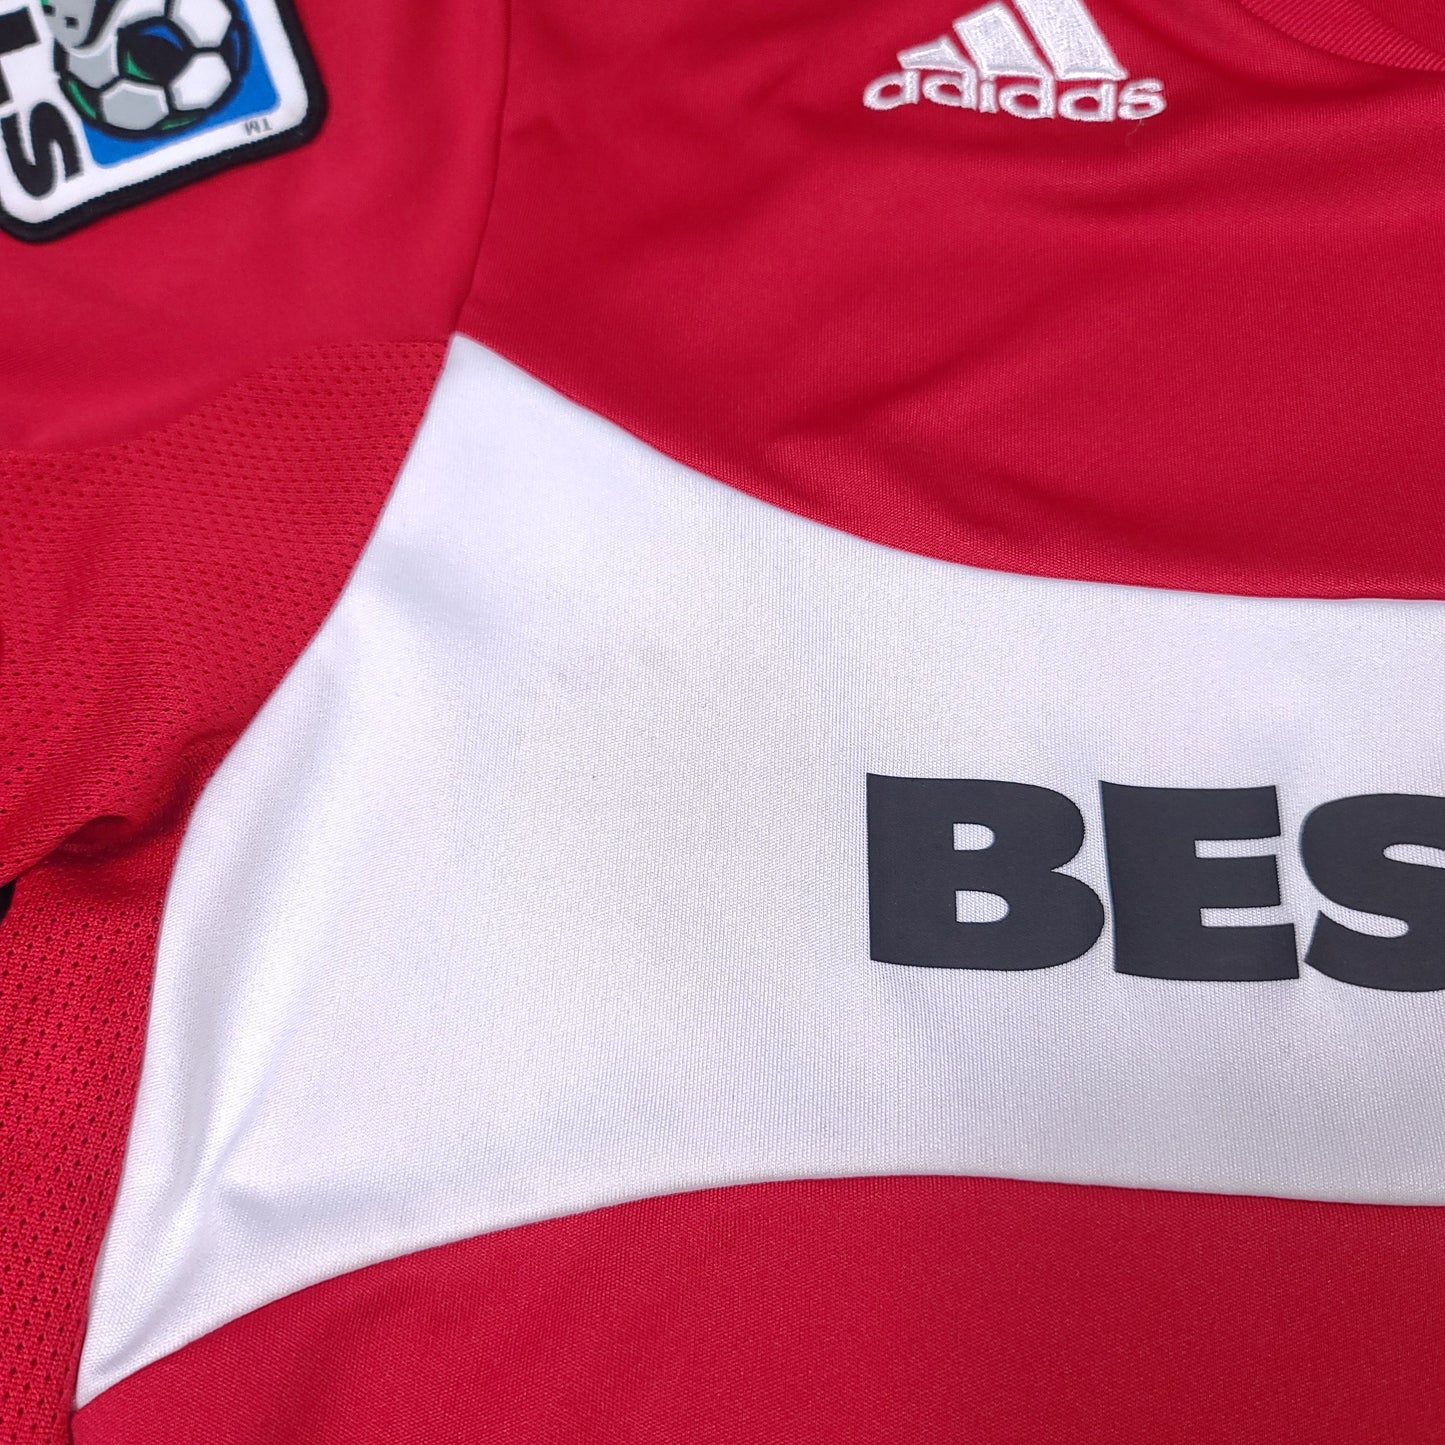 Chicago Fire Red 2010-11 adidas Home Youth Soccer Jersey